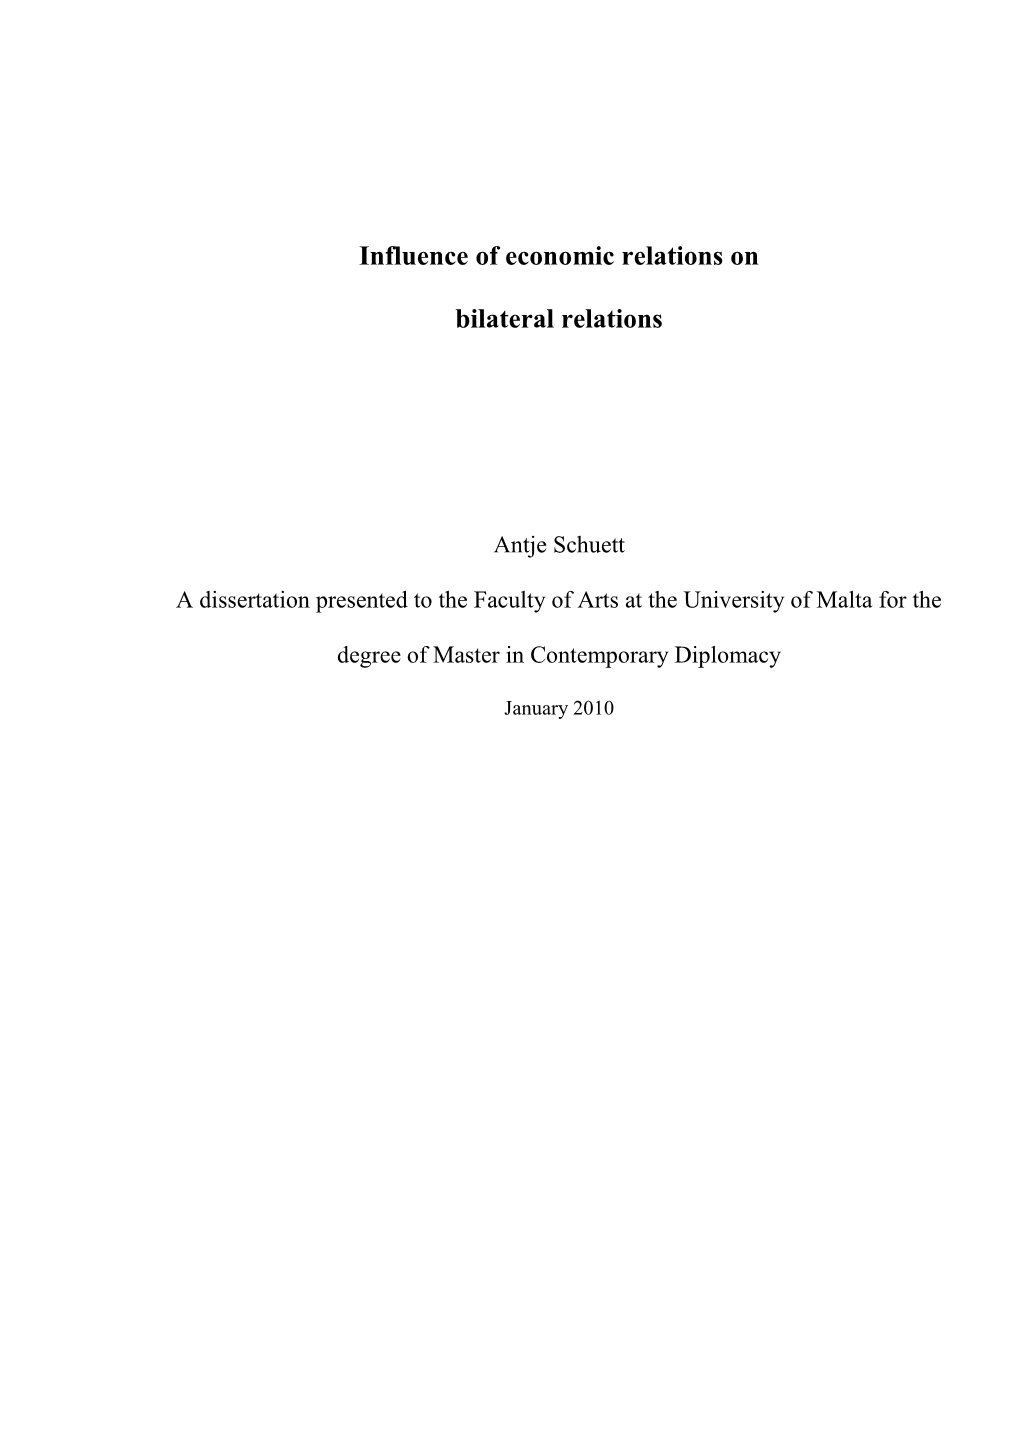 Influence of Economic Relations on Bilateral Relations”